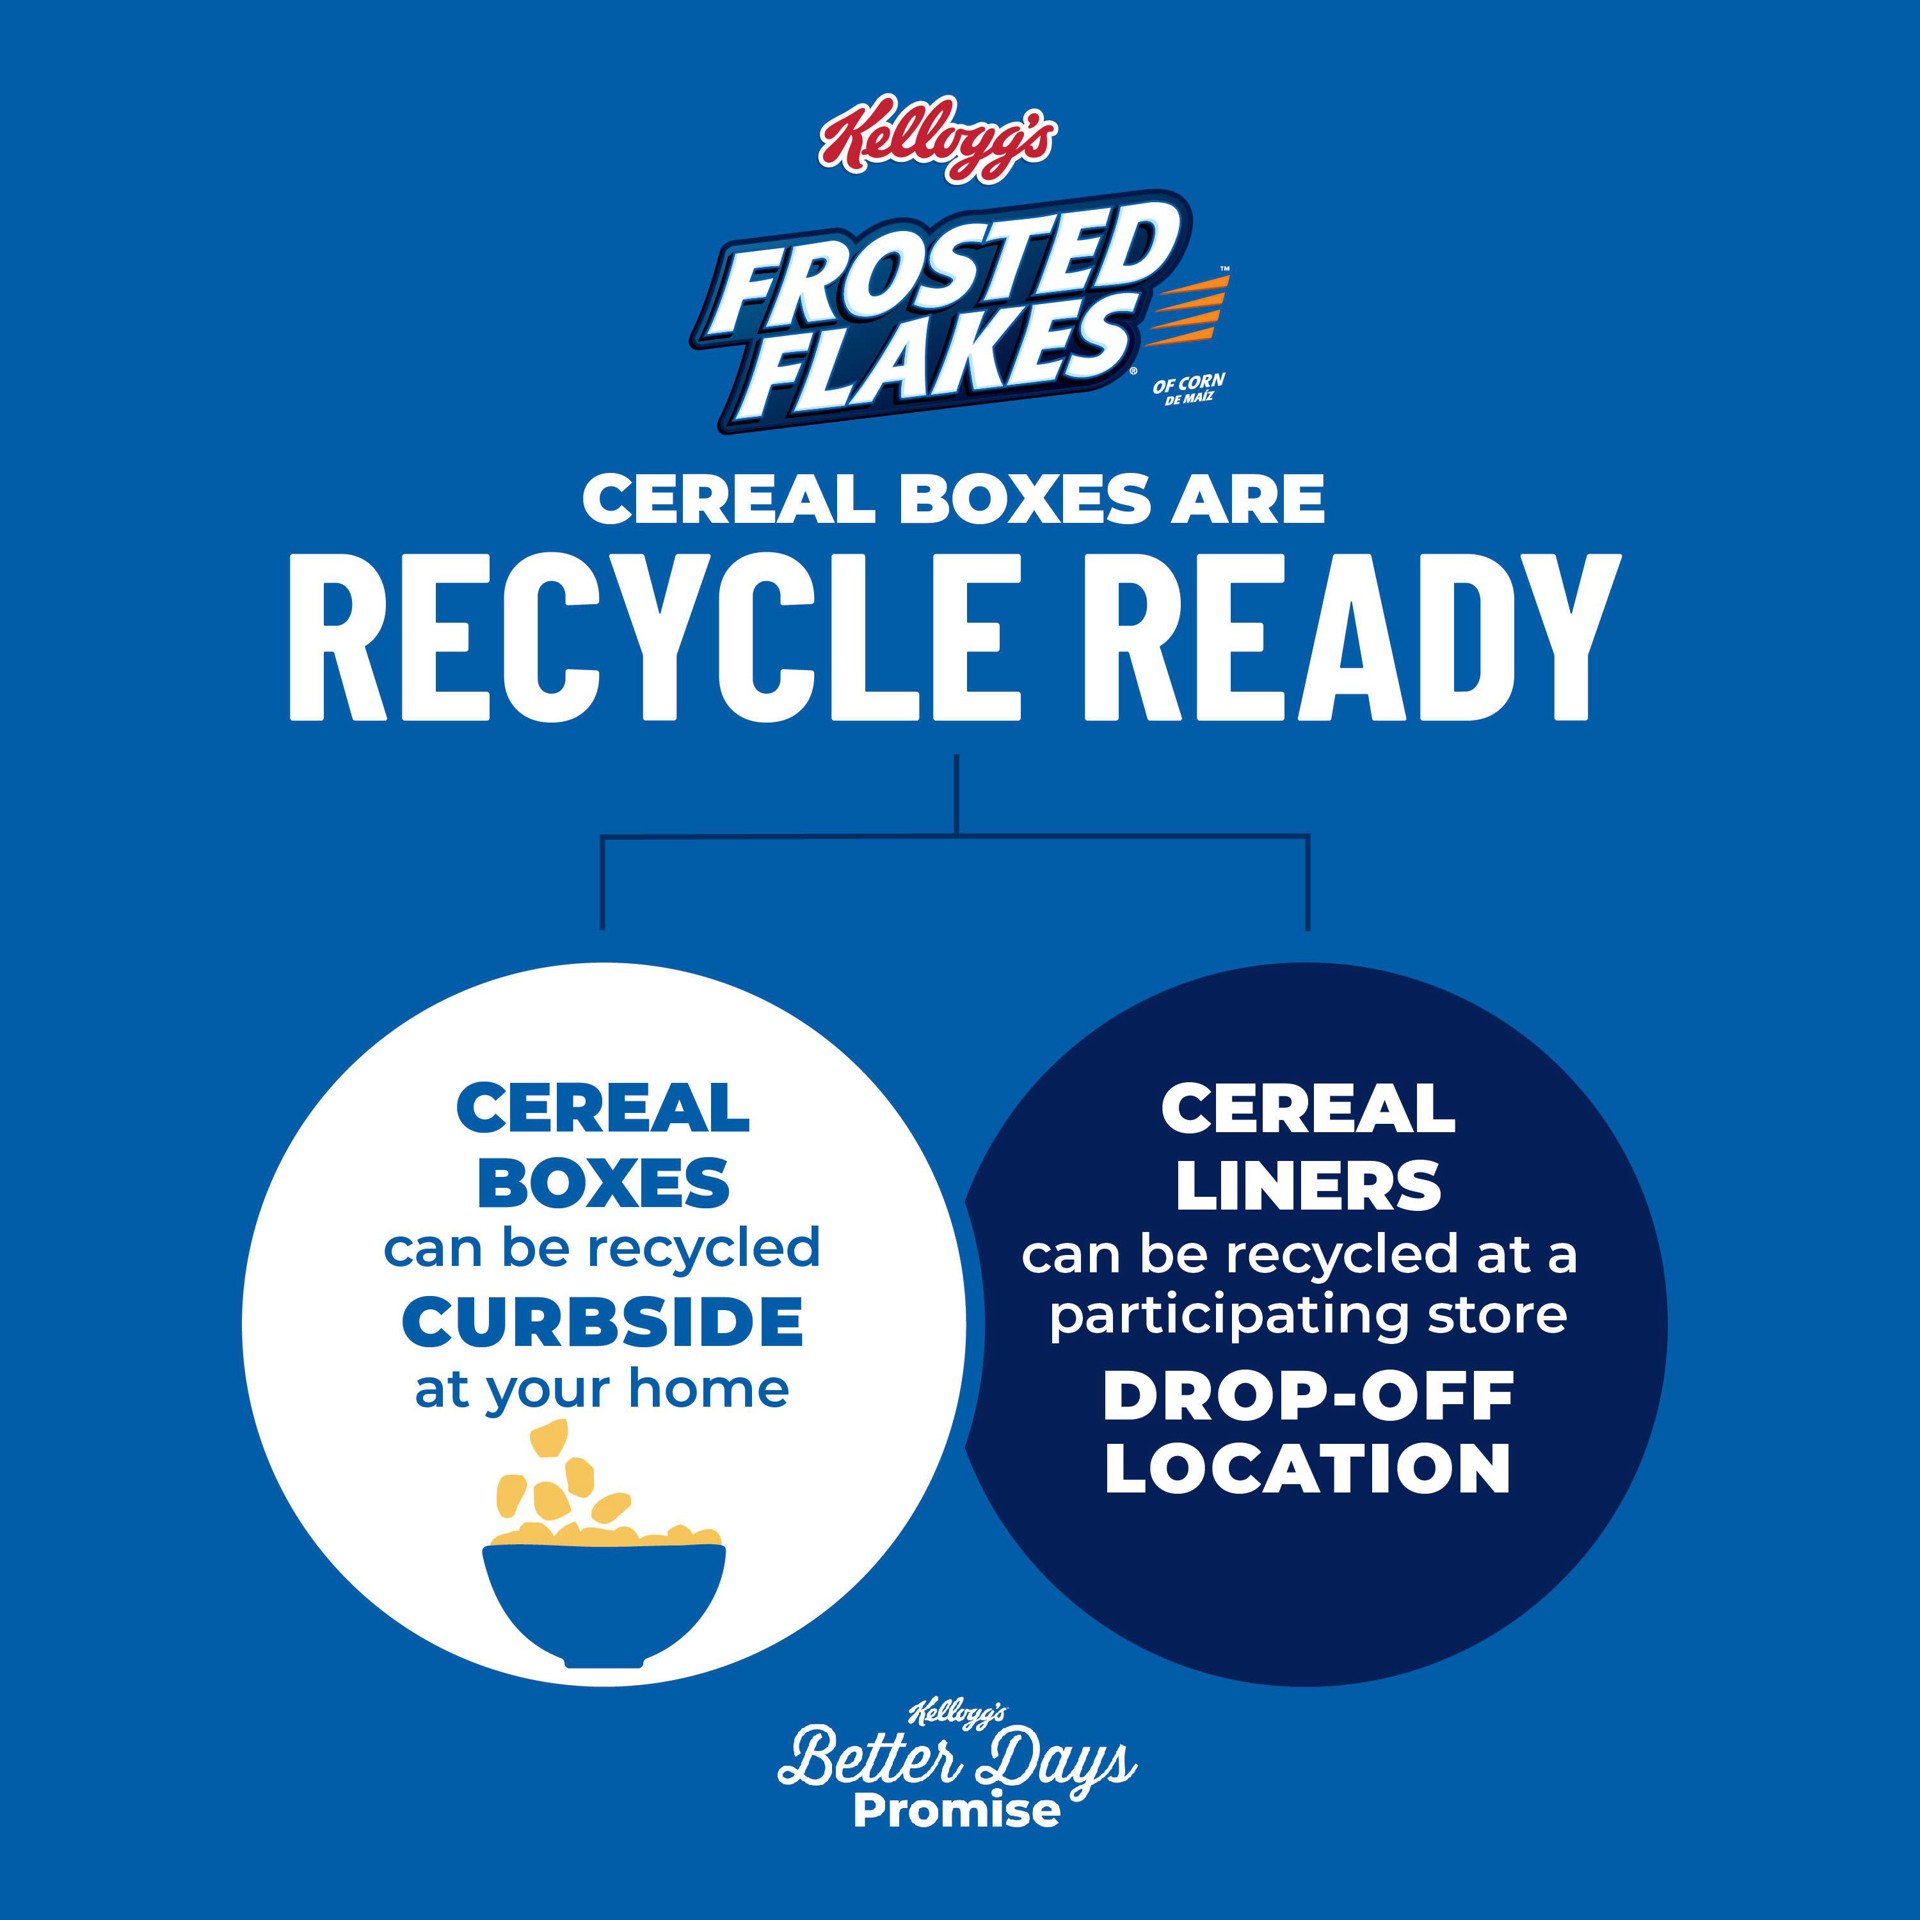 slide 3 of 5, Frosted Flakes Kellogg's Frosted Flakes Breakfast Cereal, 7 Vitamins and Minerals, Kids Snacks, Original with Marshmallows, 12oz Box, 1 Box, 12 oz